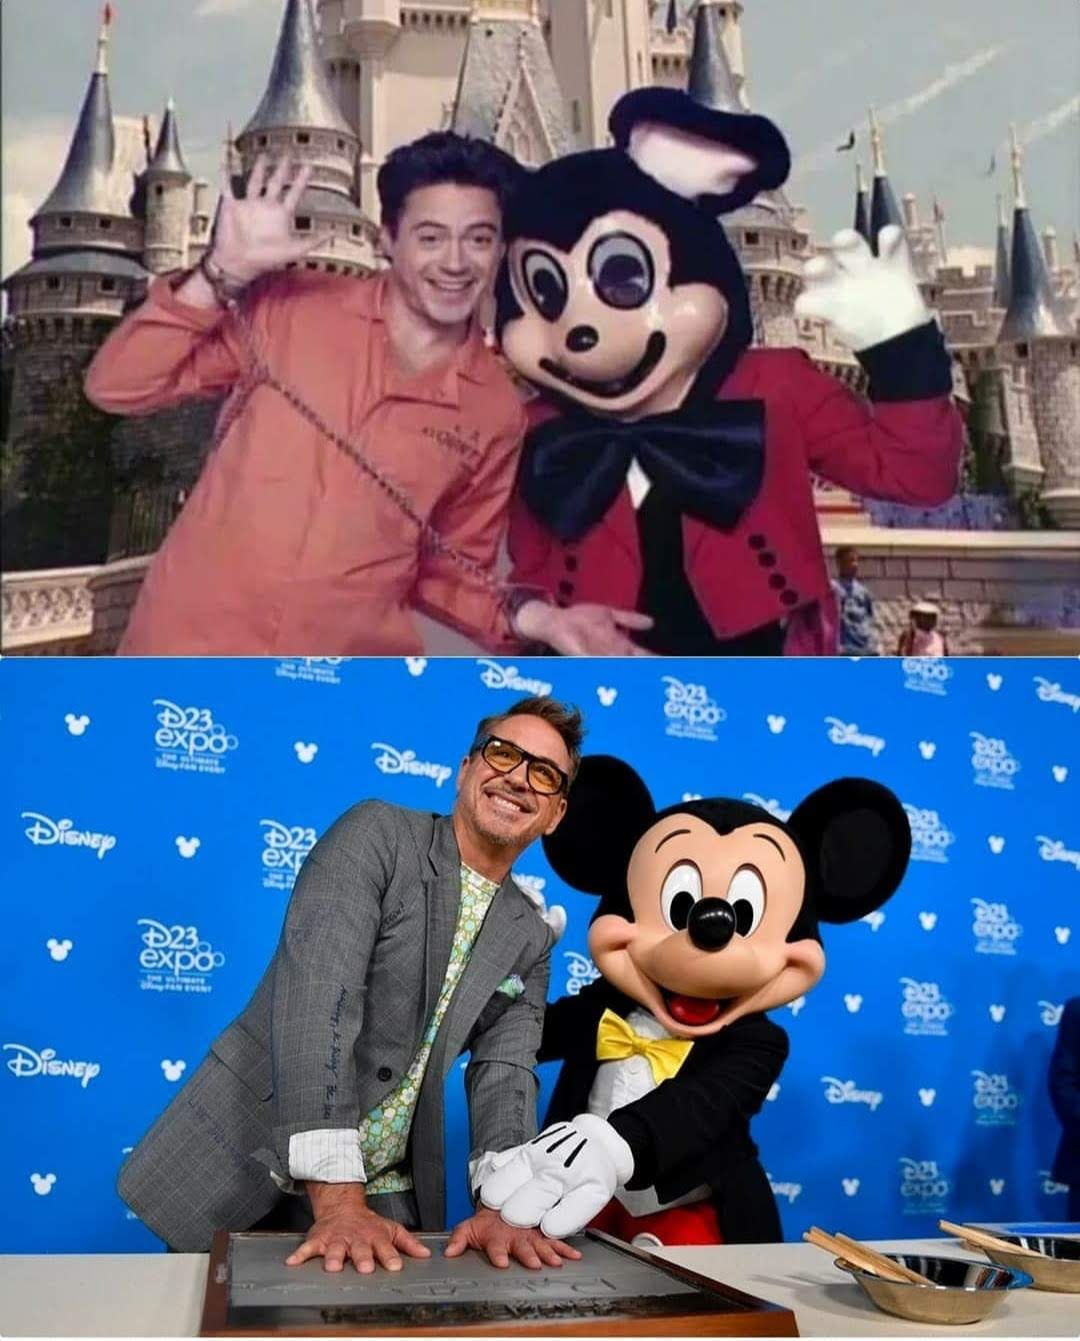 Robert Downey Jr And Mickey Mouse Difference Between Then And Now アイアンマンのロバート ダウニー Jr とミッキーマウスの昔と今 B Side Of Cia